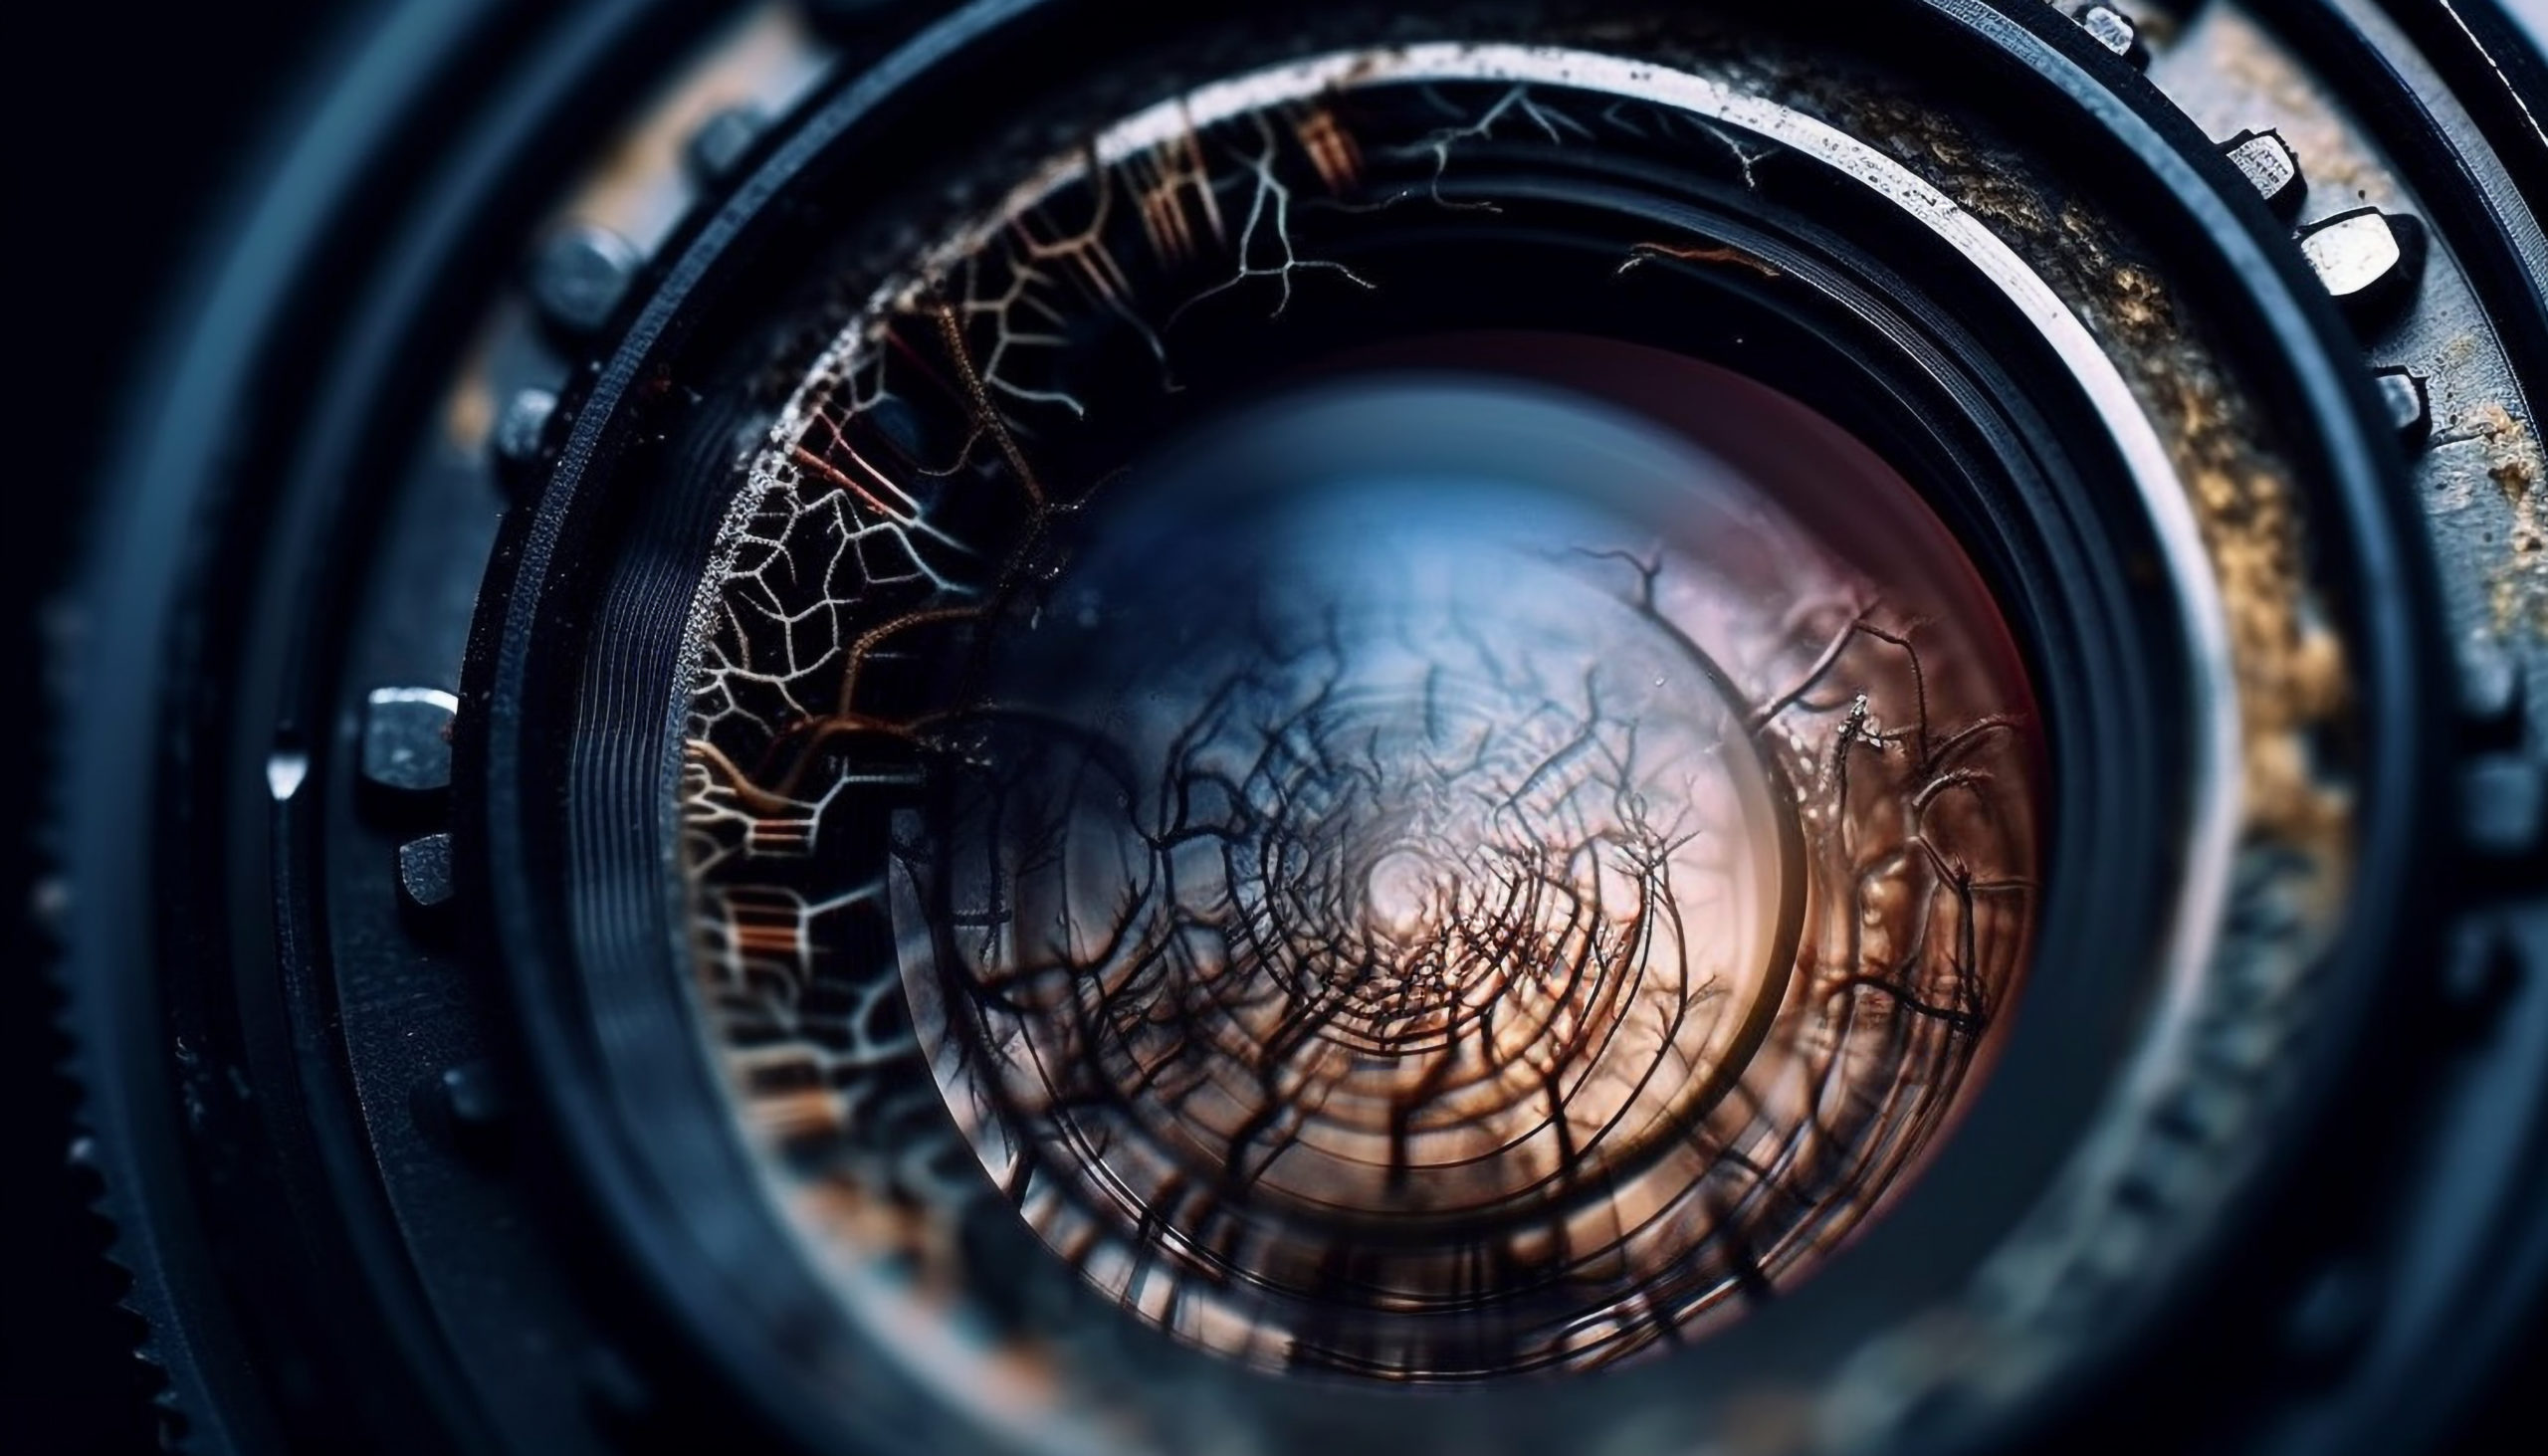 Reflection on steel machinery with camera lens generated by artificial intelligence